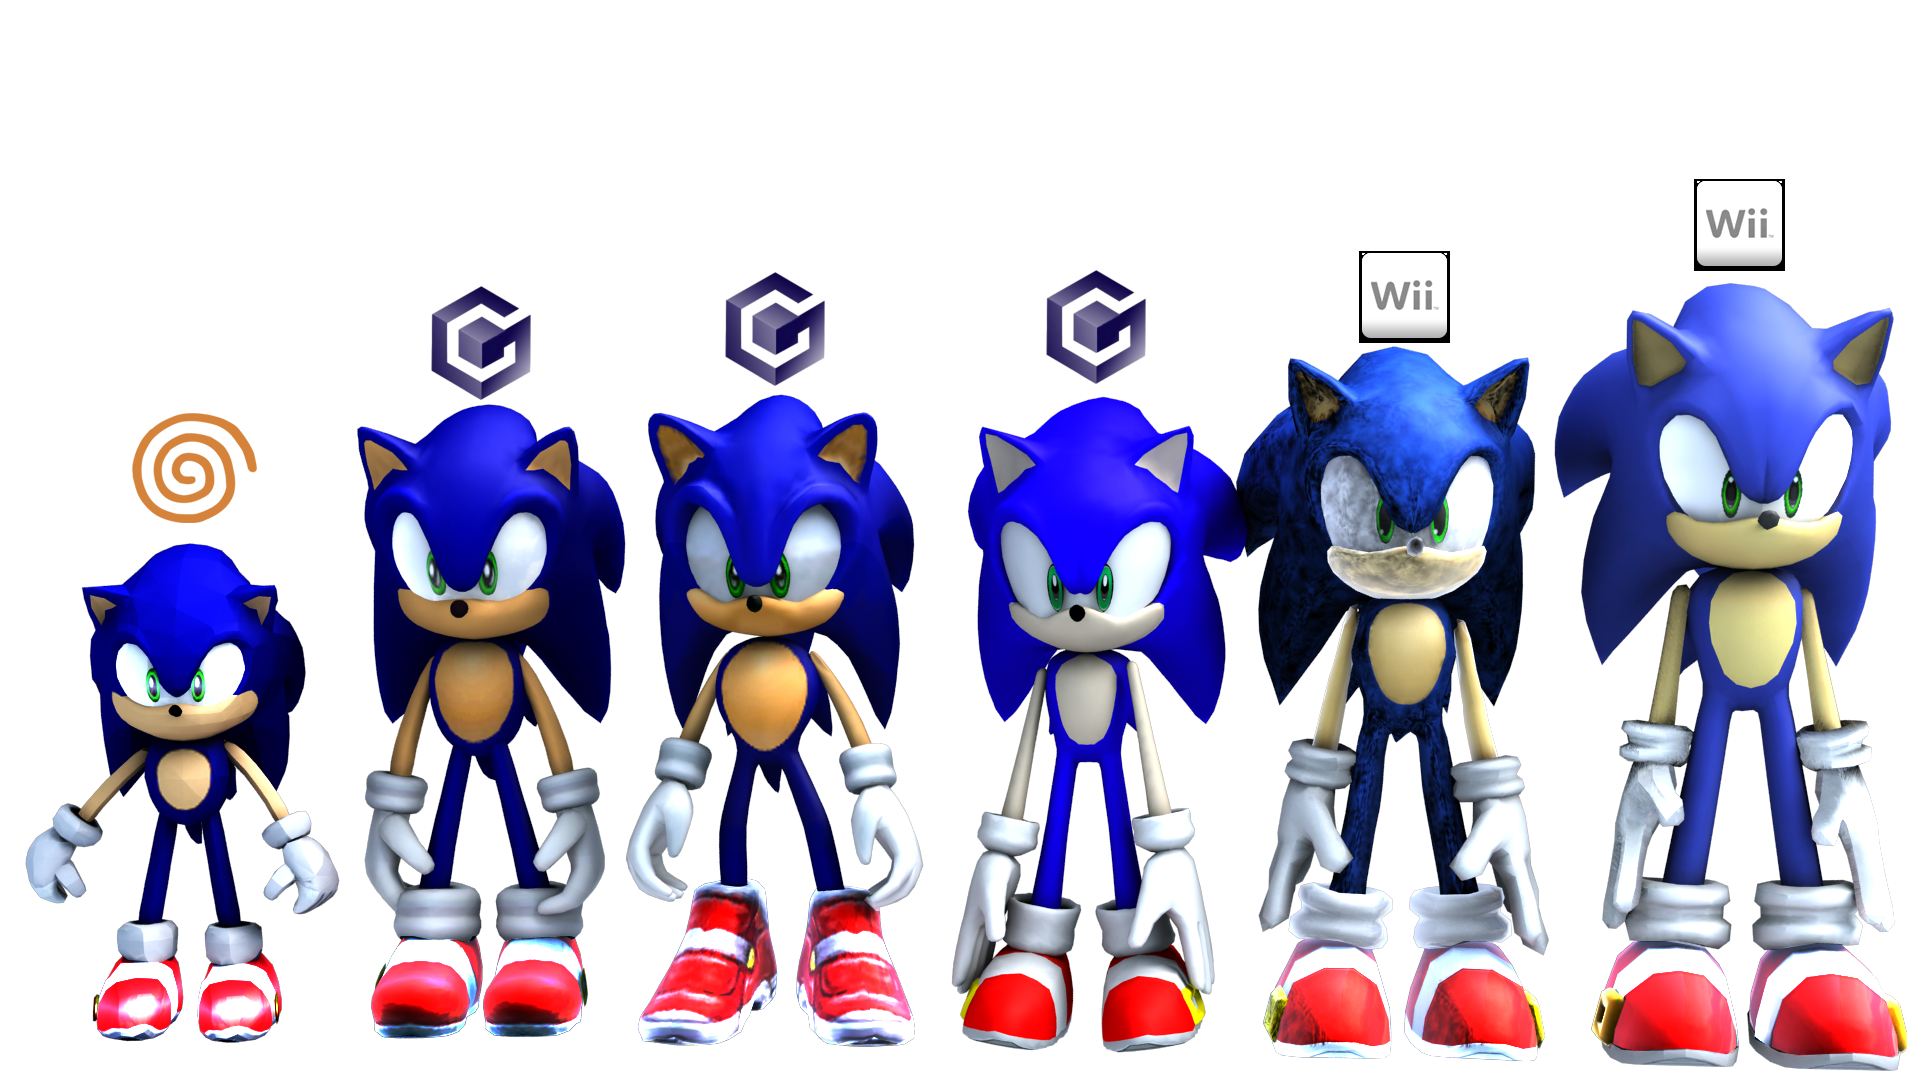 Sonic Classic Collection by gxigames12 on DeviantArt